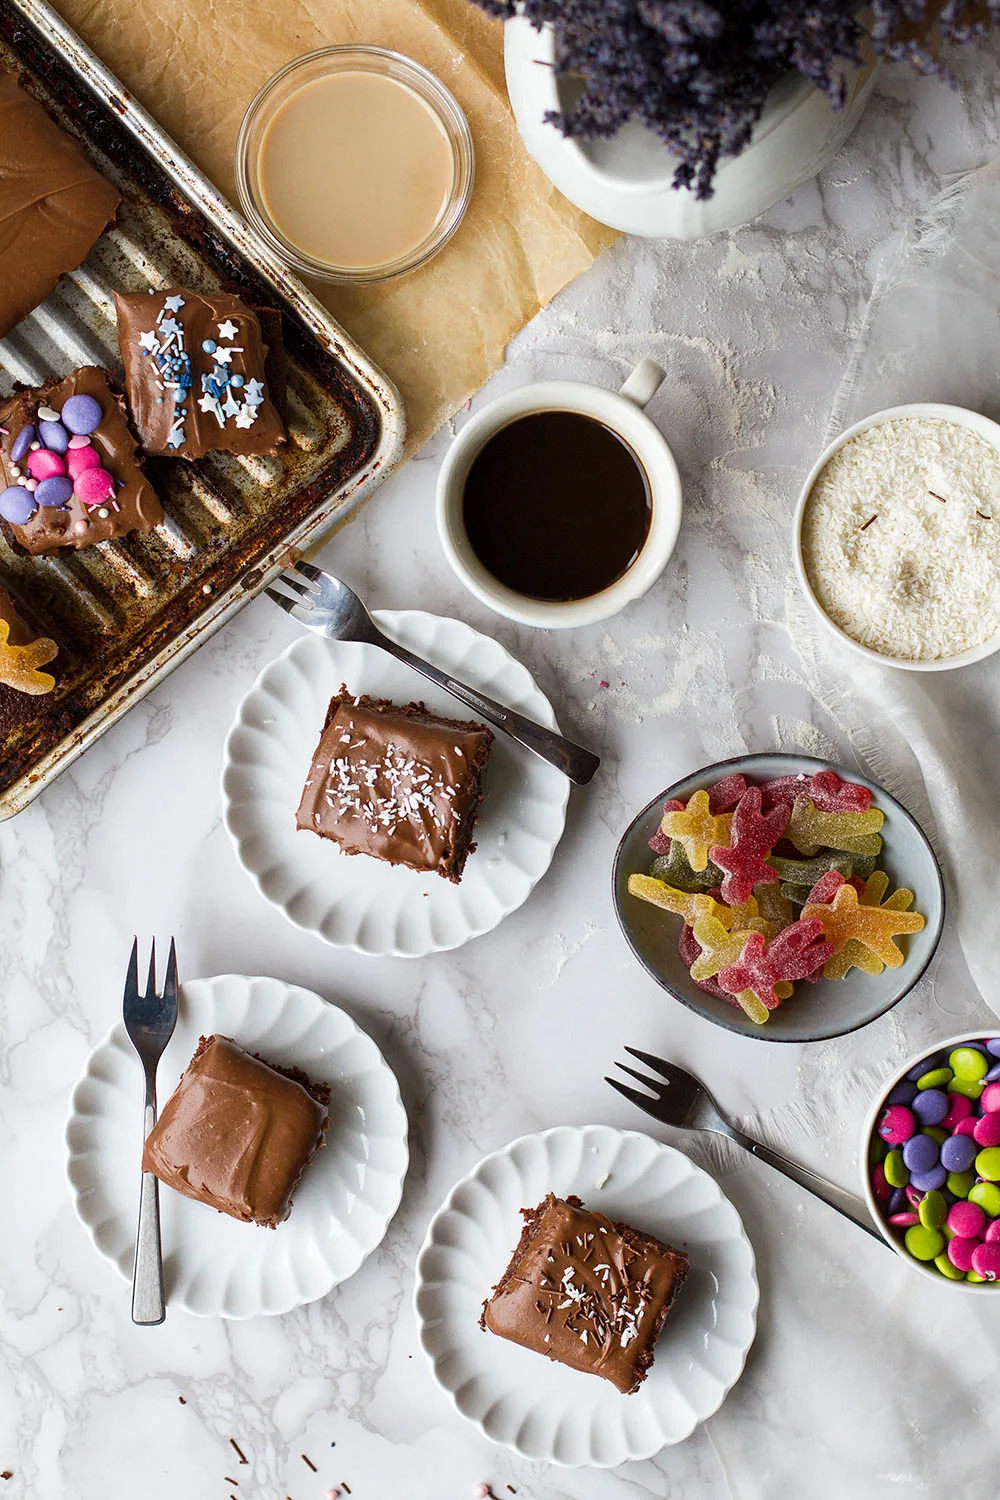 Marble table with several vintage plates with square slices of chocolate cake.